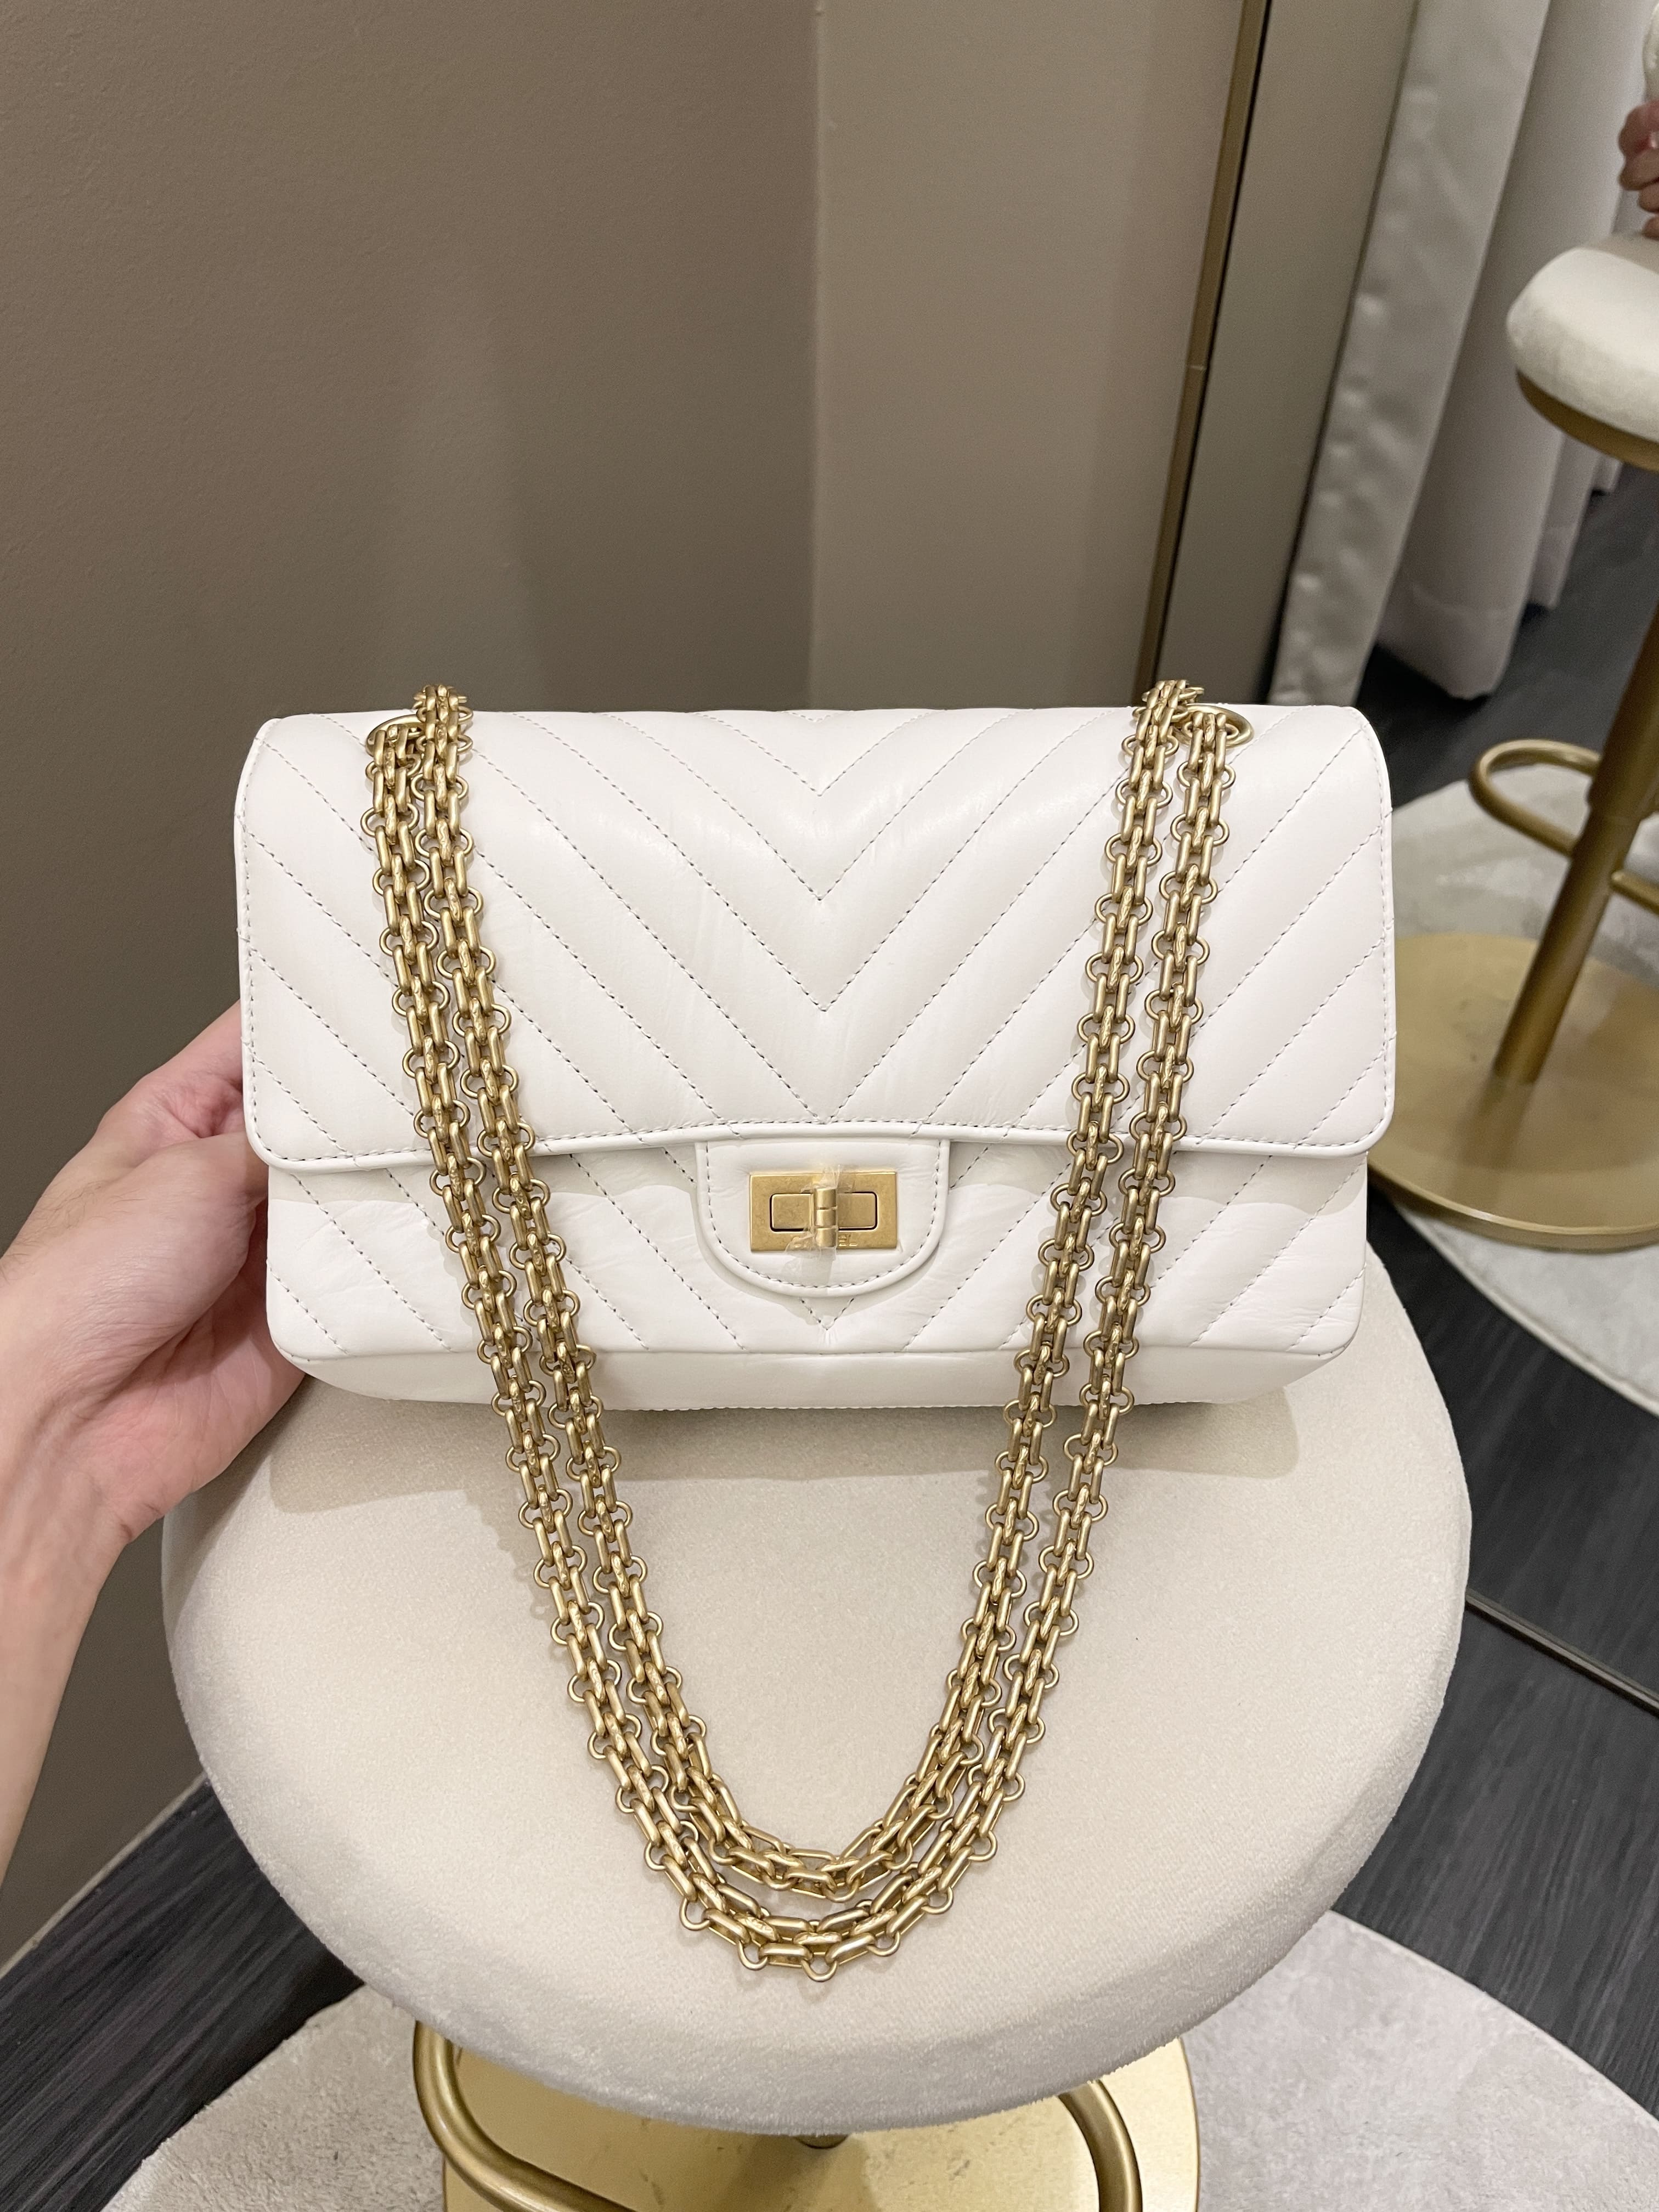 What Is The Difference Between Chanel Classic Flap Bag And Chanel